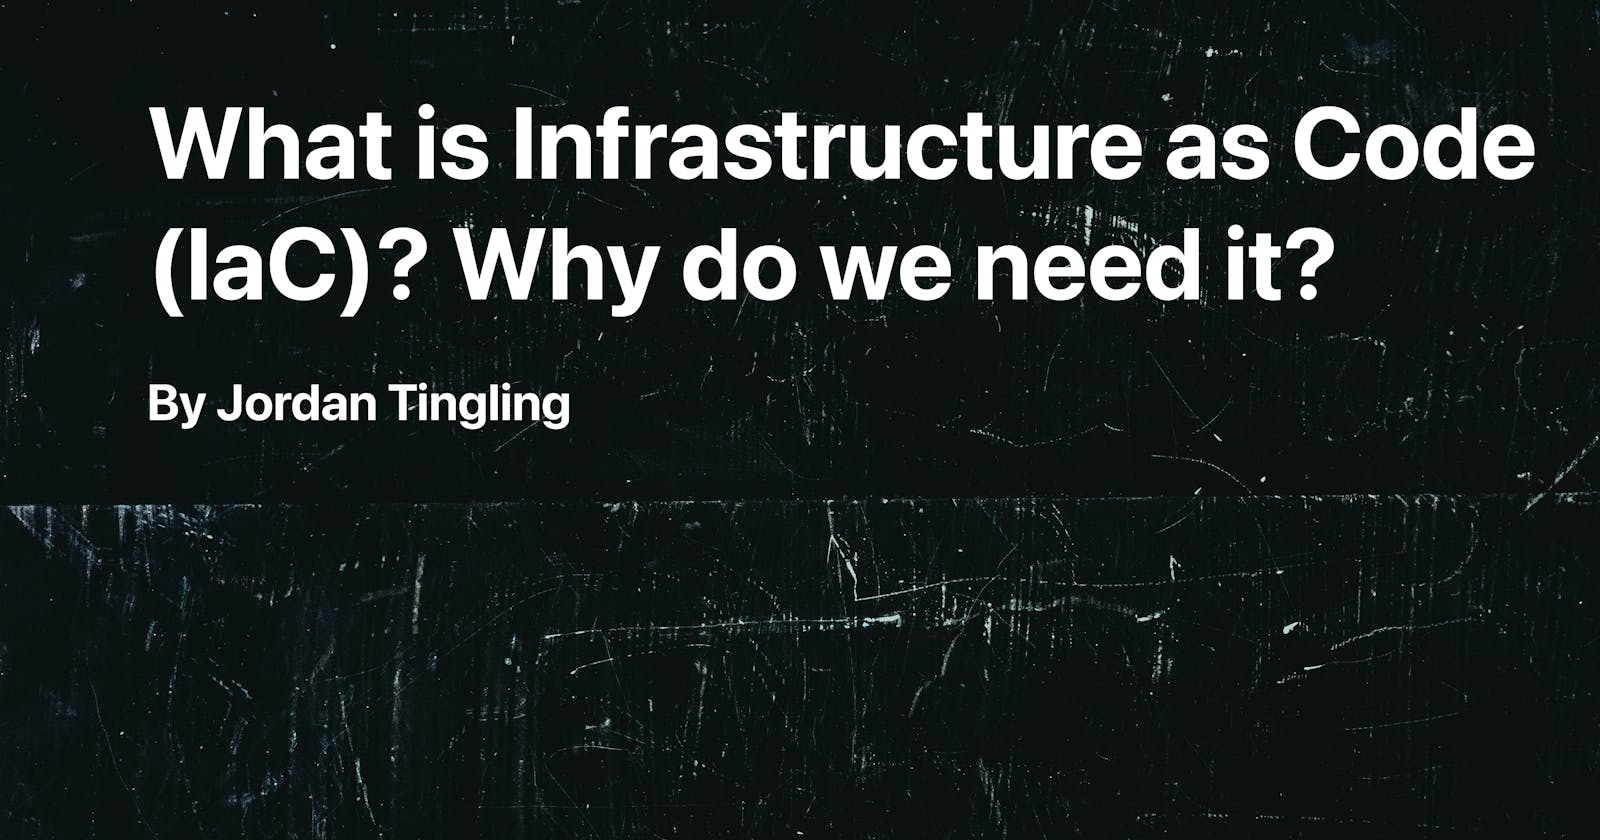 What is Infrastructure as Code? (IaC) and why do we need it in our lives?